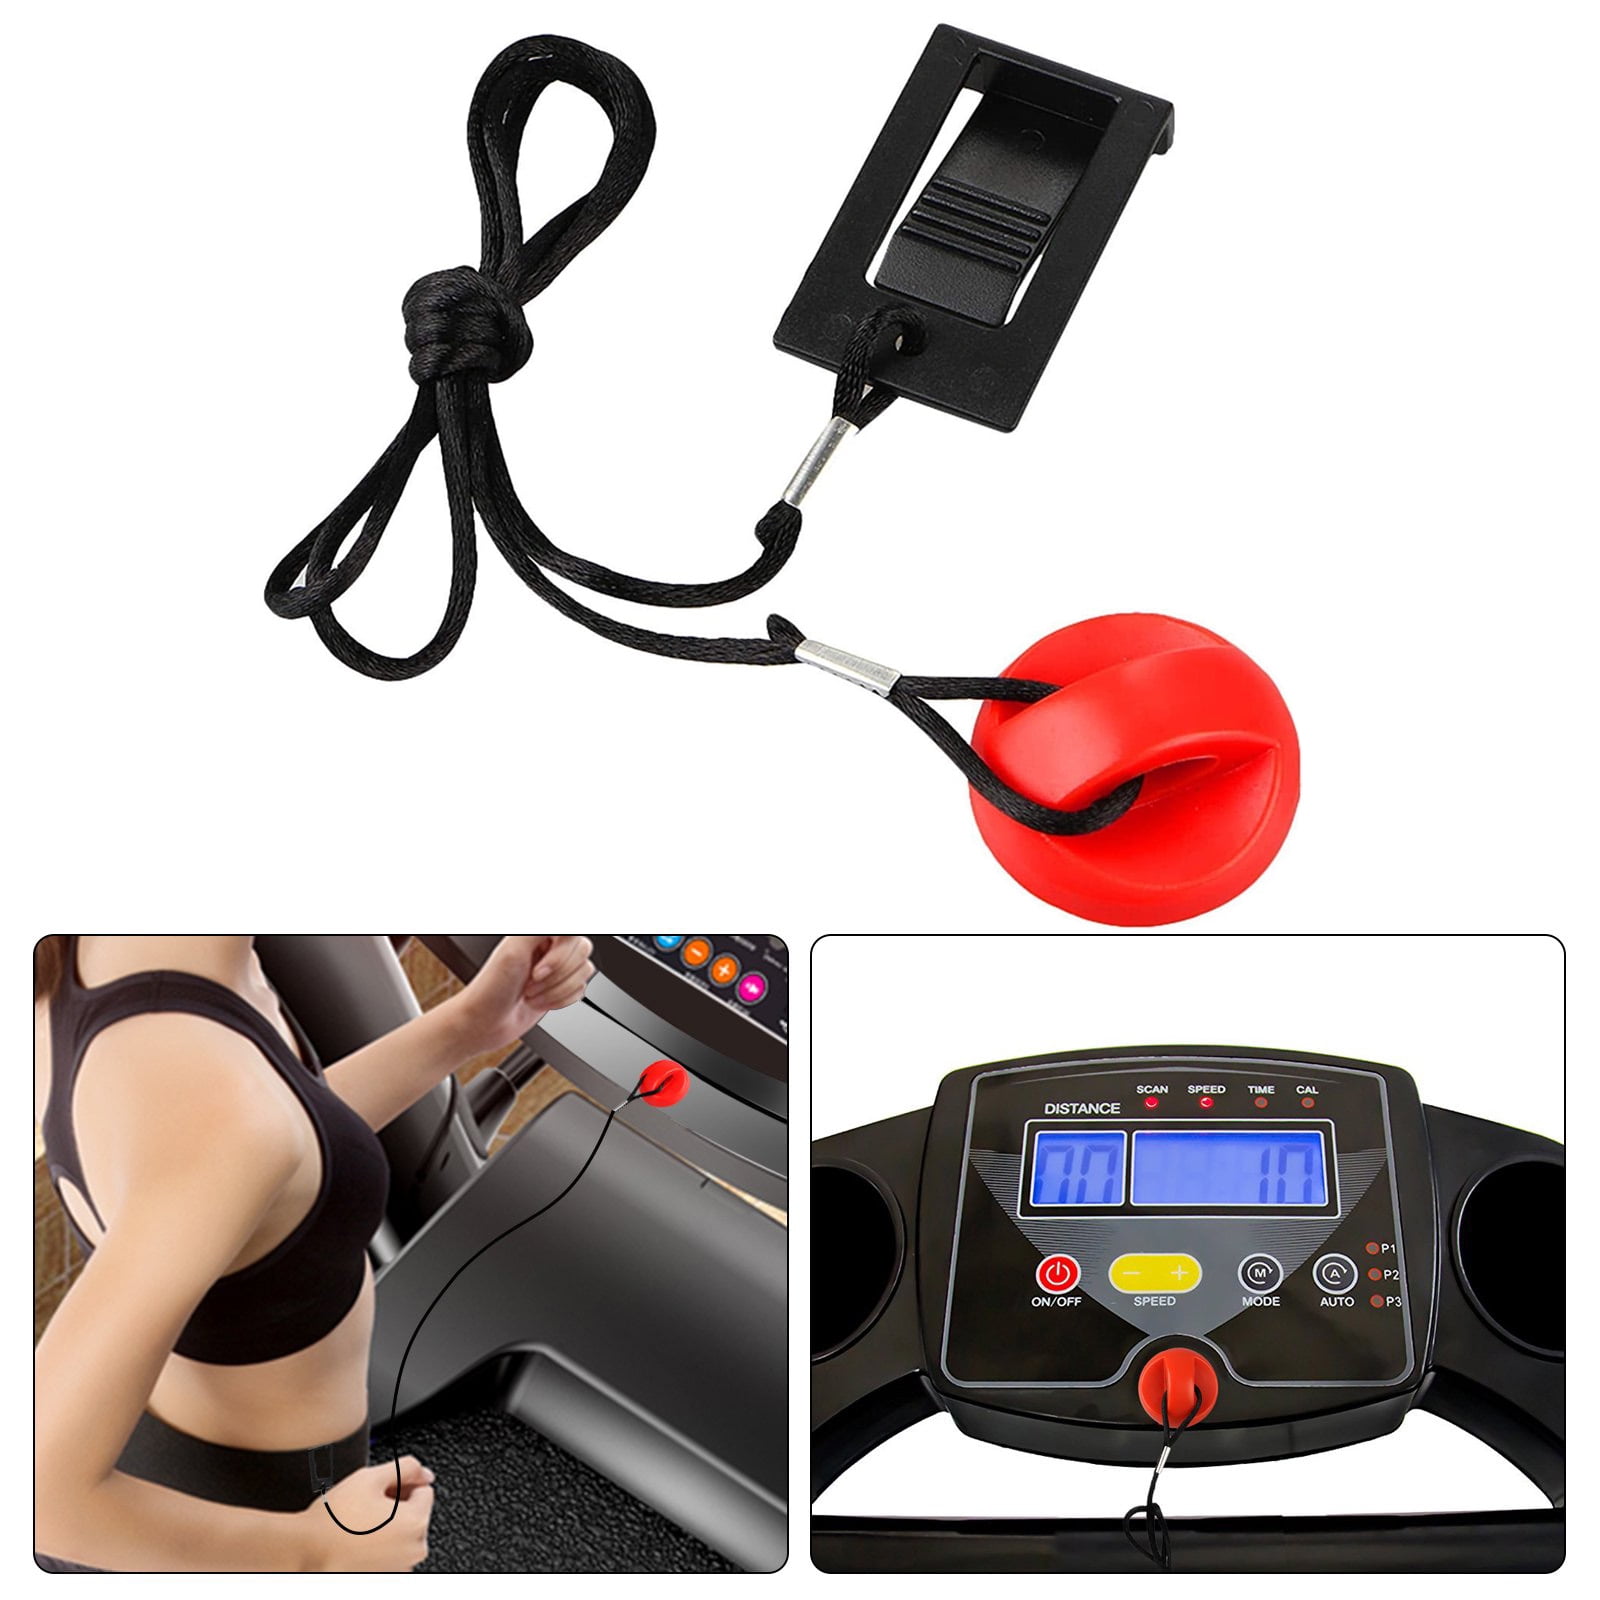 Details about   Mini Running Machine Emergency Stop Treadmill Key Safety Lock Universal Magnet 